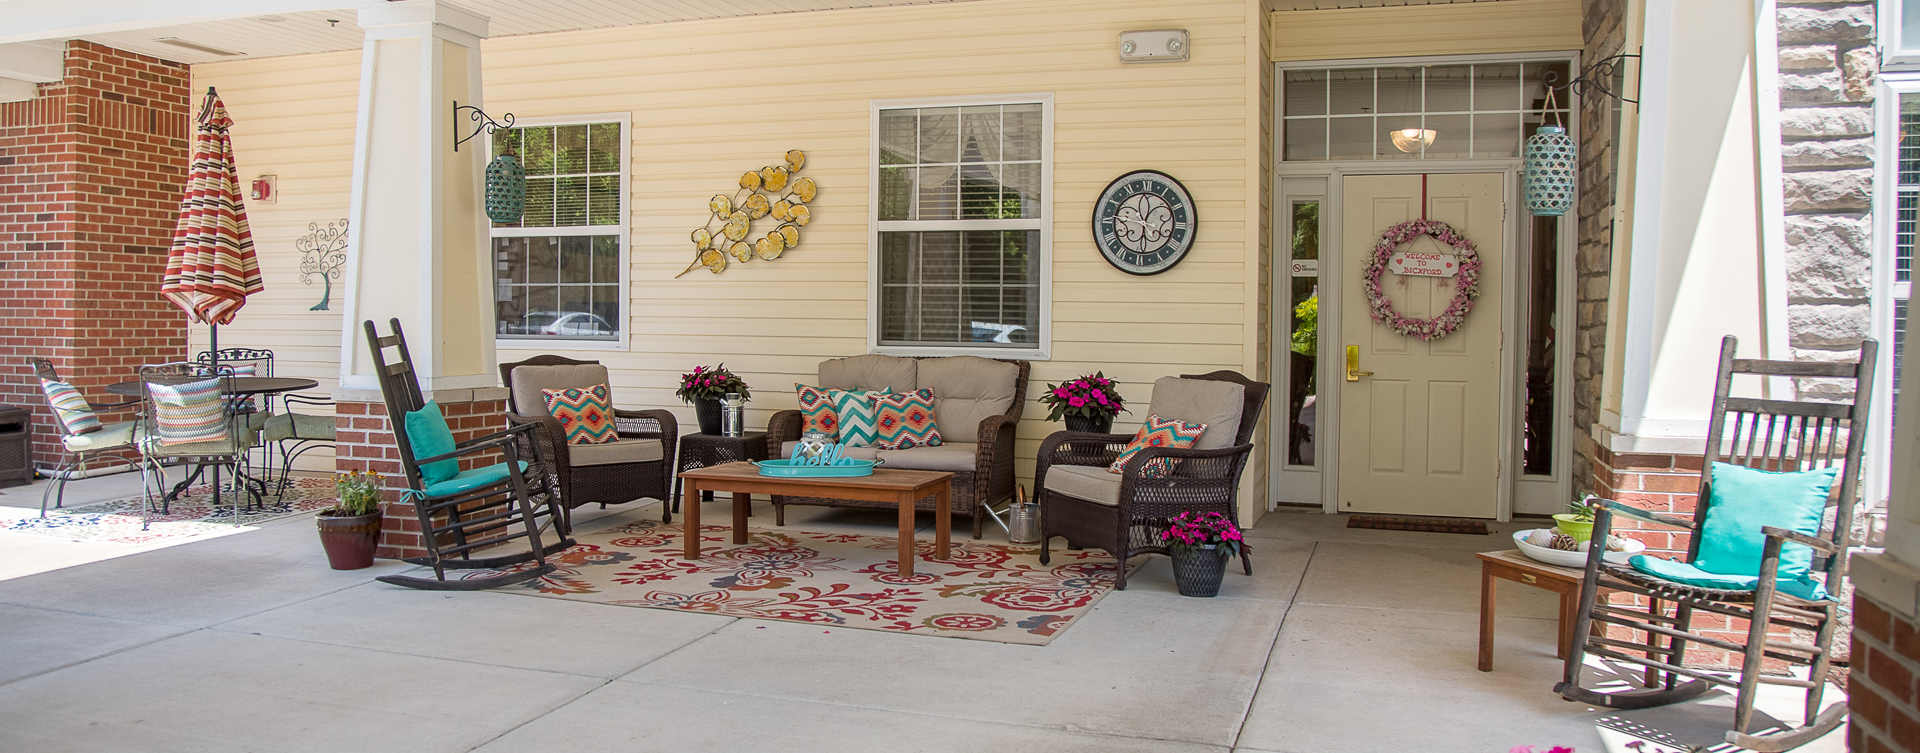 Relax in your favorite chair on the porch at Bickford of Moline